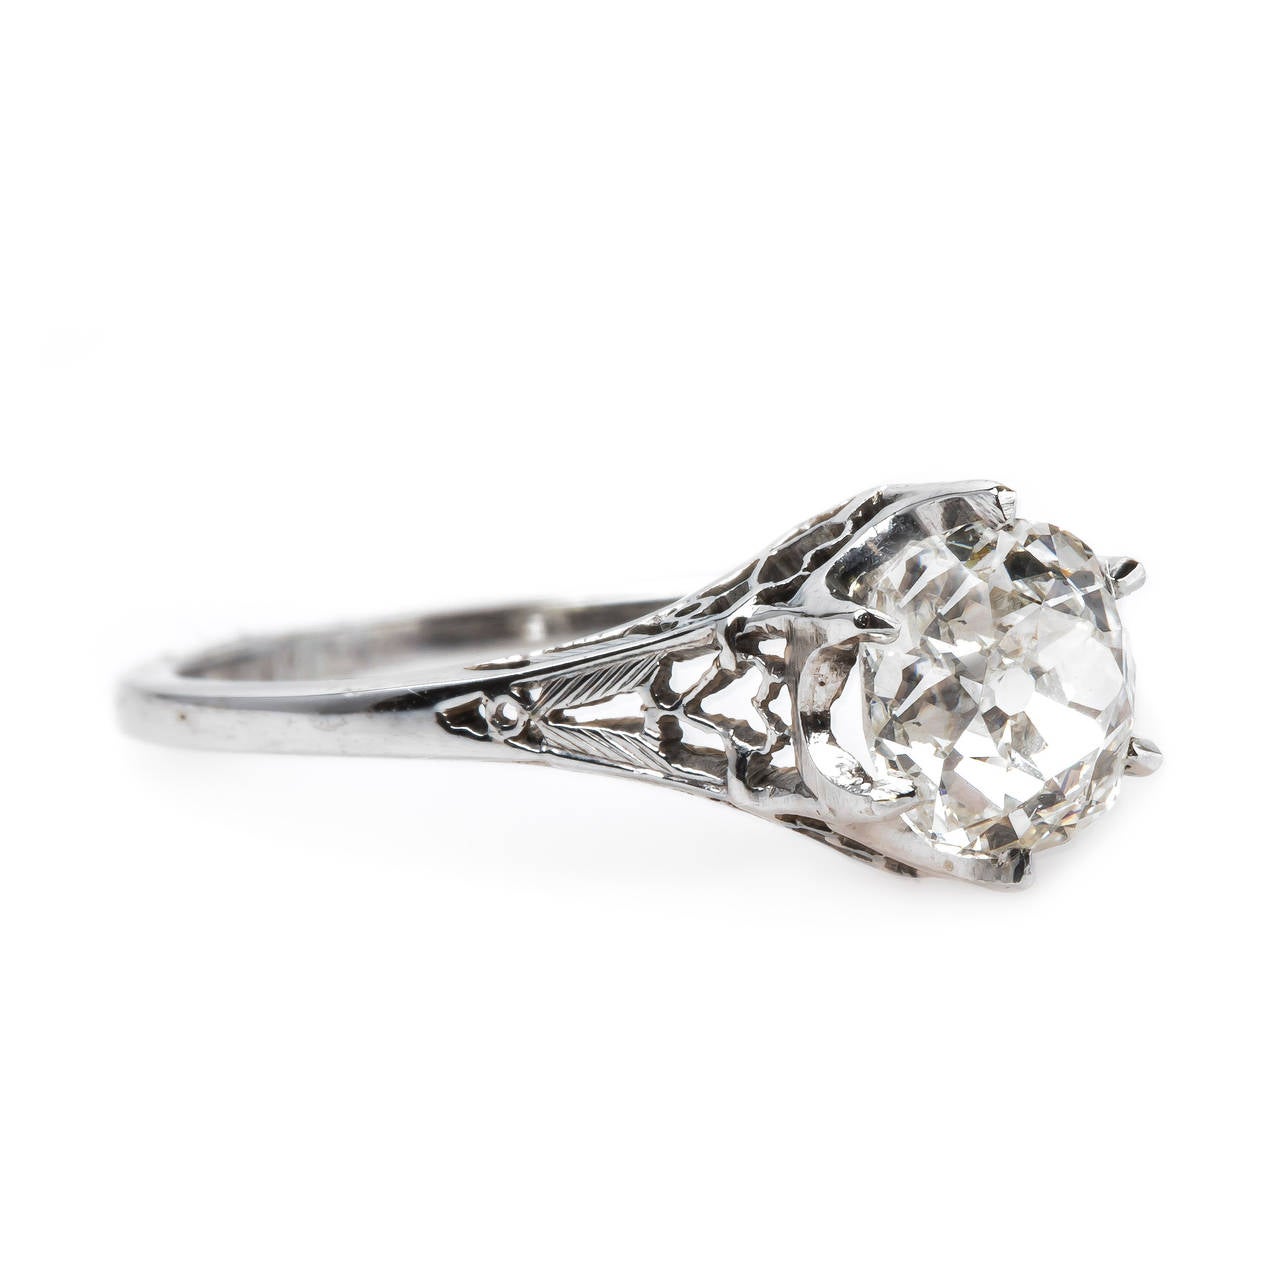 Clydebank is a romantic authentic Edwardian era (circa 1920)18k white gold ring centering a six-prong 0.95ct EGL certified Old Mine Cut diamond graded J color and SI1 clarity. This timeless solitaire engagement ring is finished with beautiful open